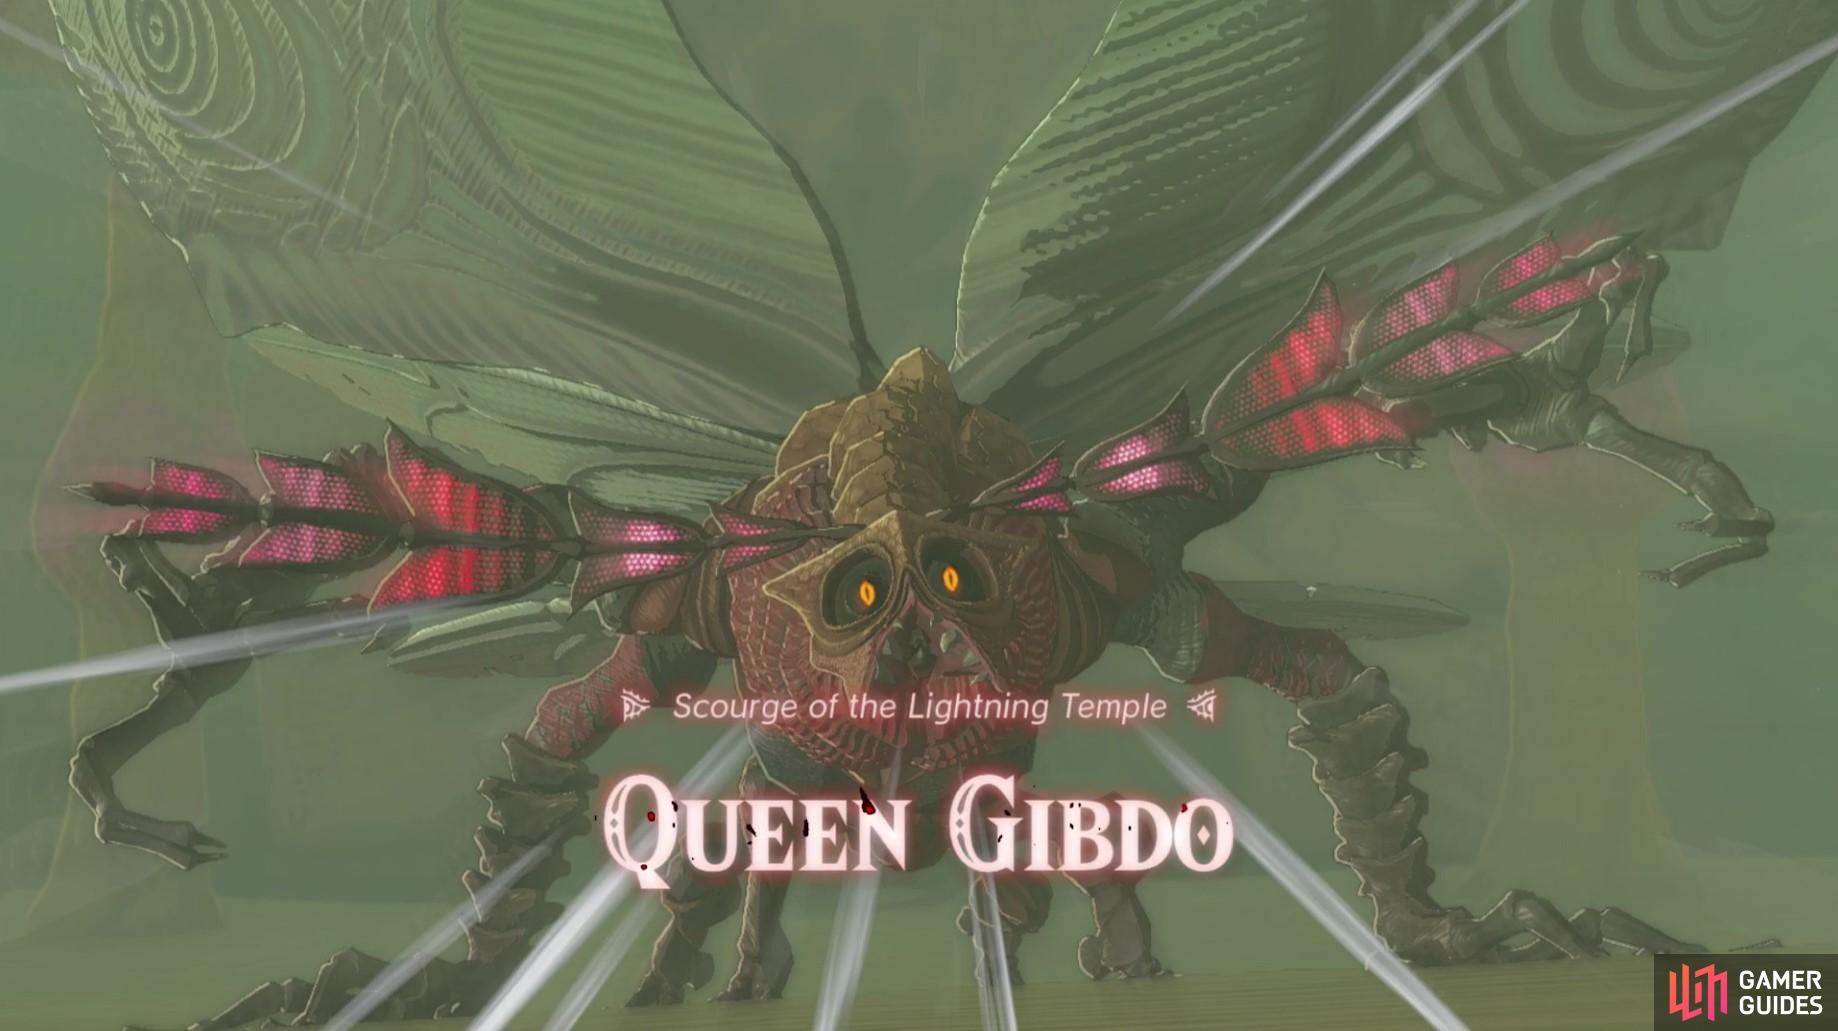 Before you can get into the Lightning Temple, you’ll need to fight Queen Gibdo!